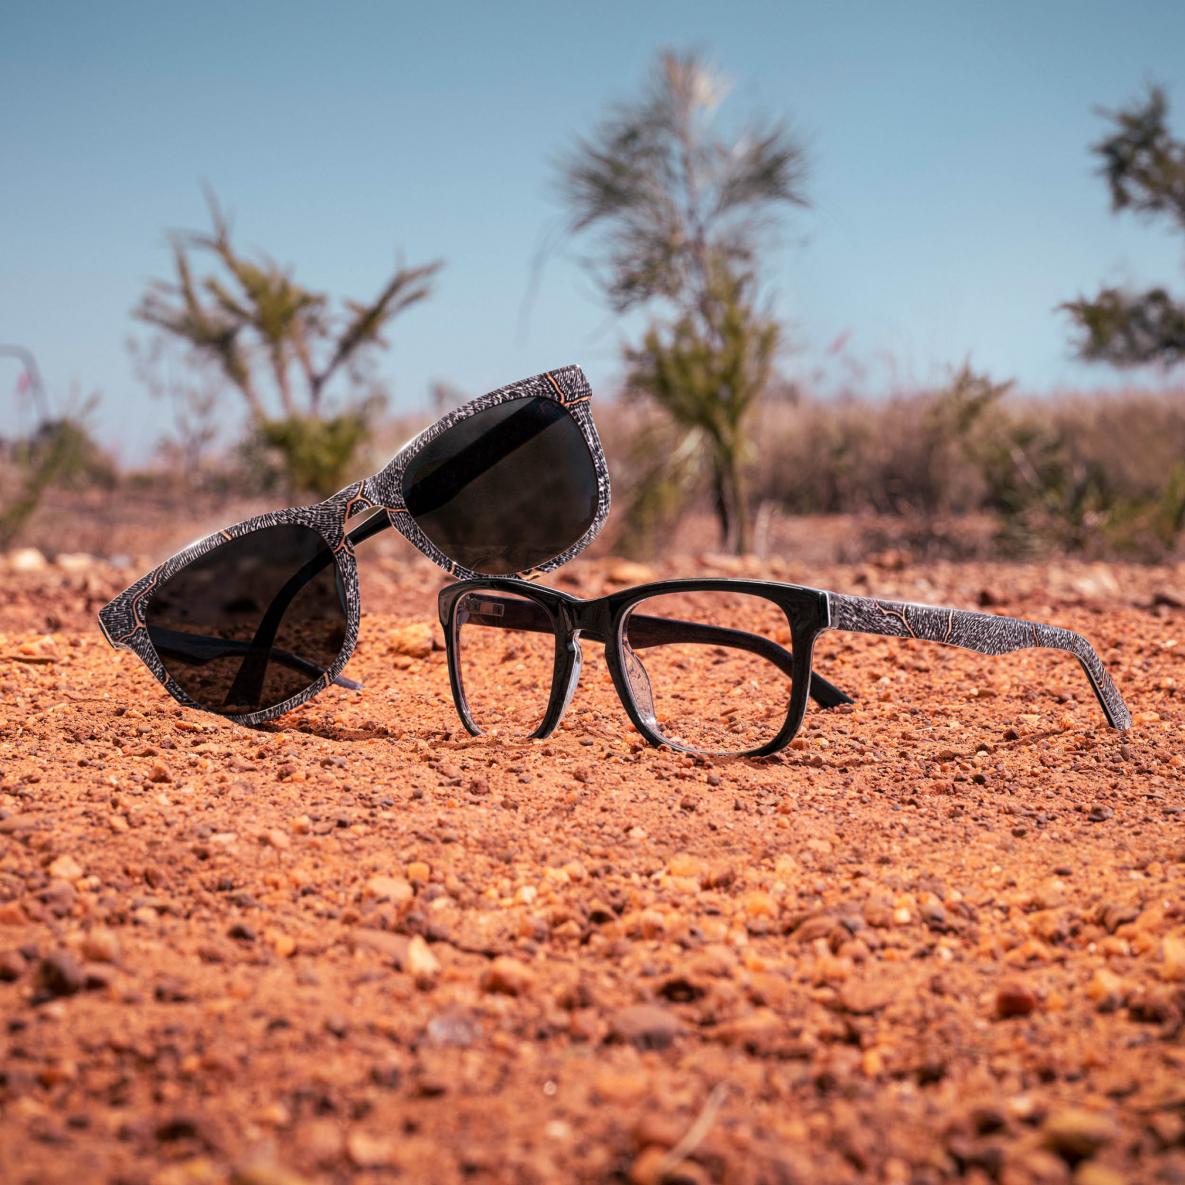 New limited-edition frames at Specsavers